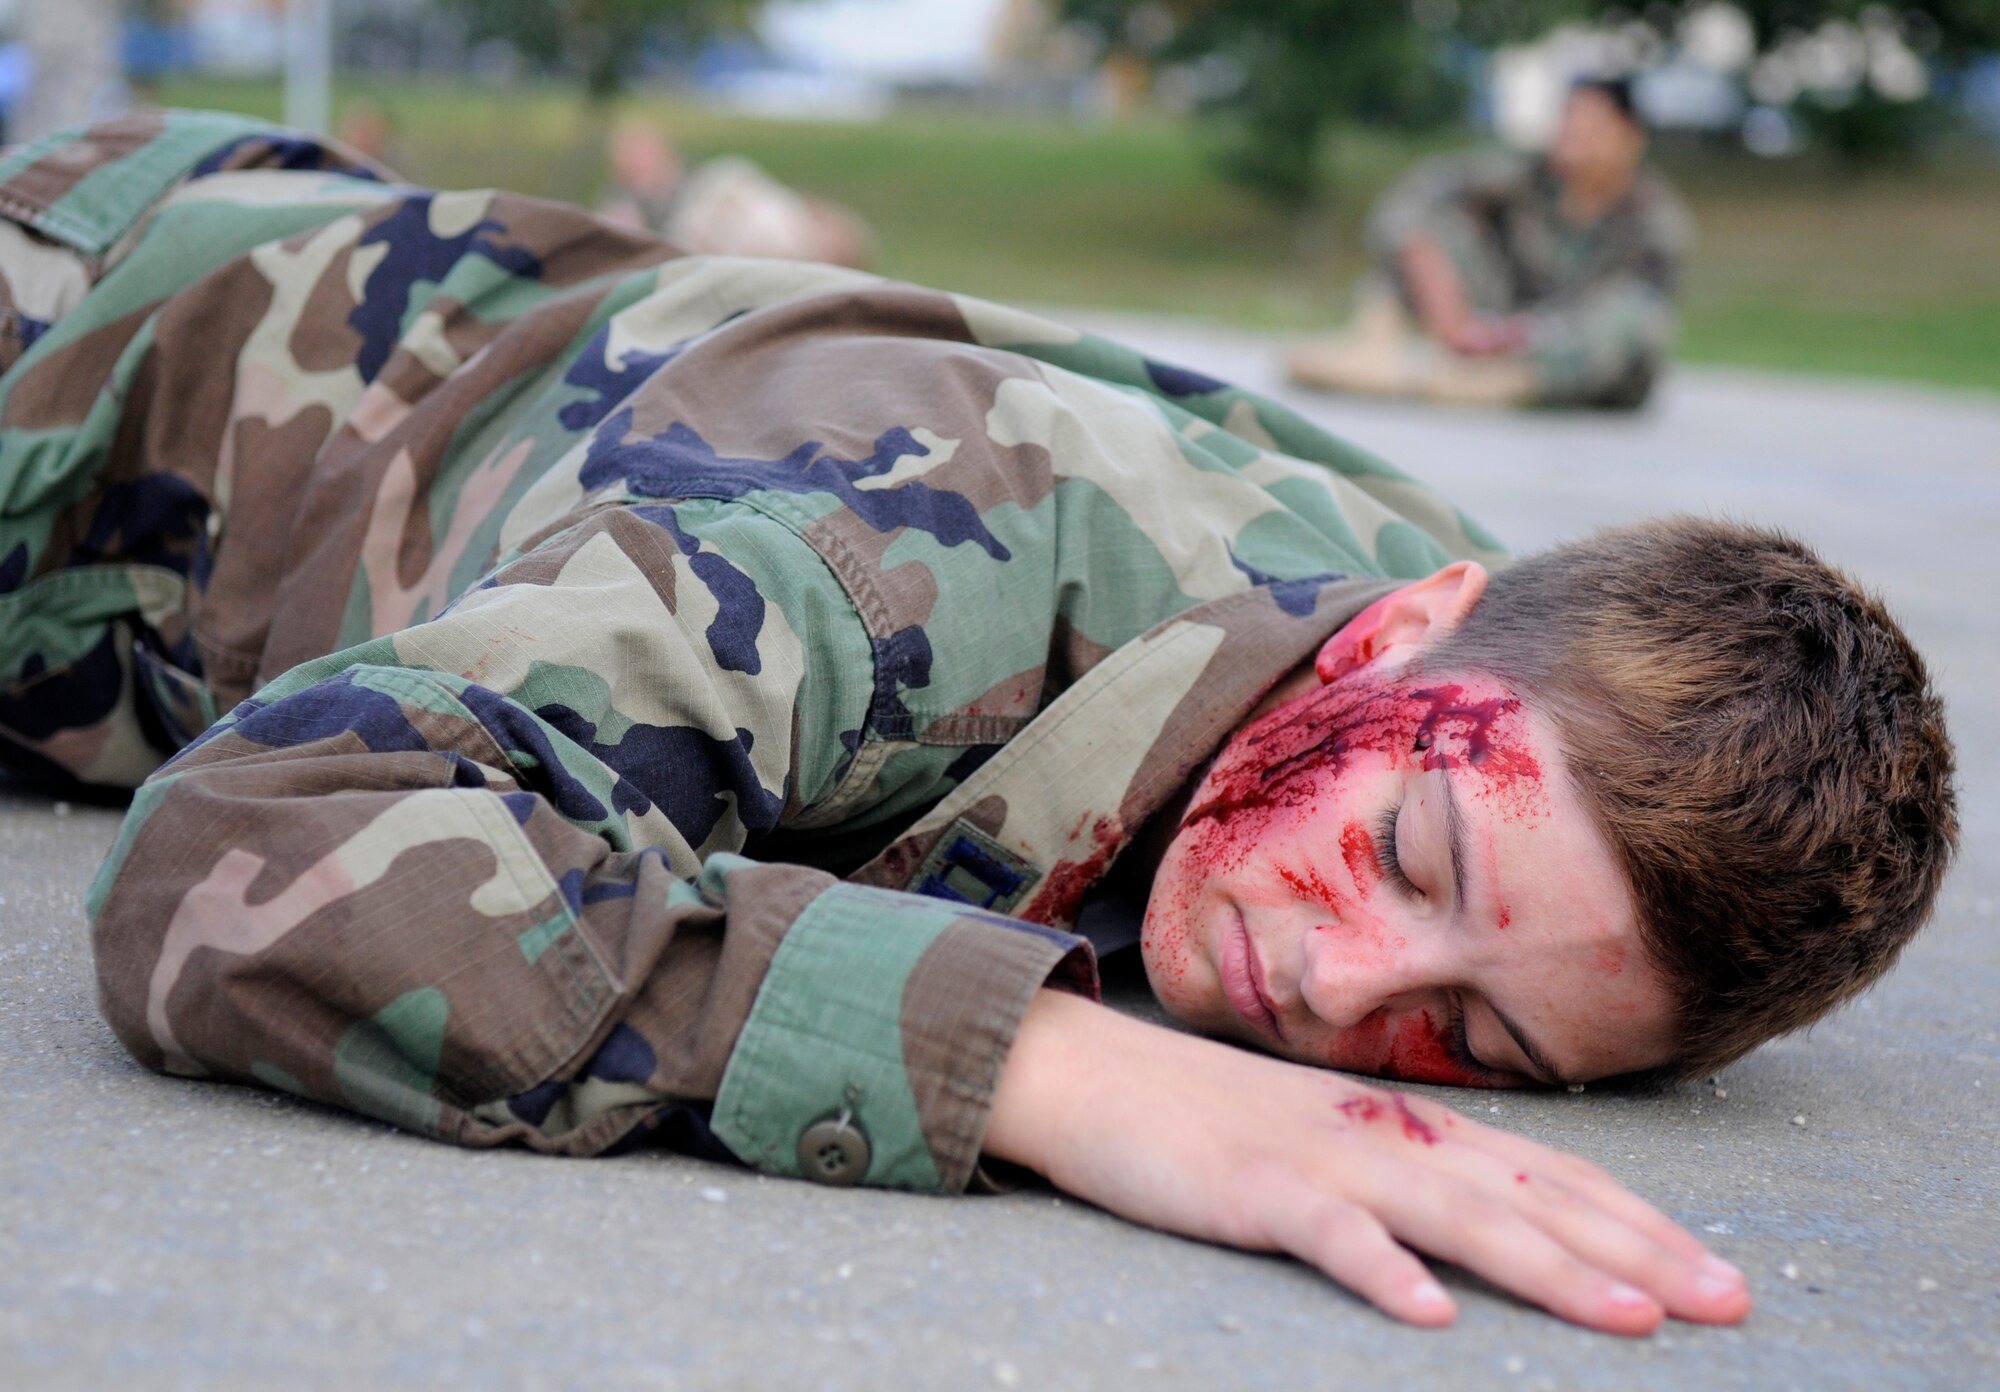 SPANGDAHLEM AIR BASE, Germany – Airman Charla Maddox, 52nd Security Forces Squadron, acts as an injured Airman during an all hazards response training emergency management and mass casualty exercise Oct. 7. All simulated casualties were instructed to act as real as possible to provide a suitable training environment for the responders. (U.S. Air Force photo/Airman 1st Class Staci Miller)